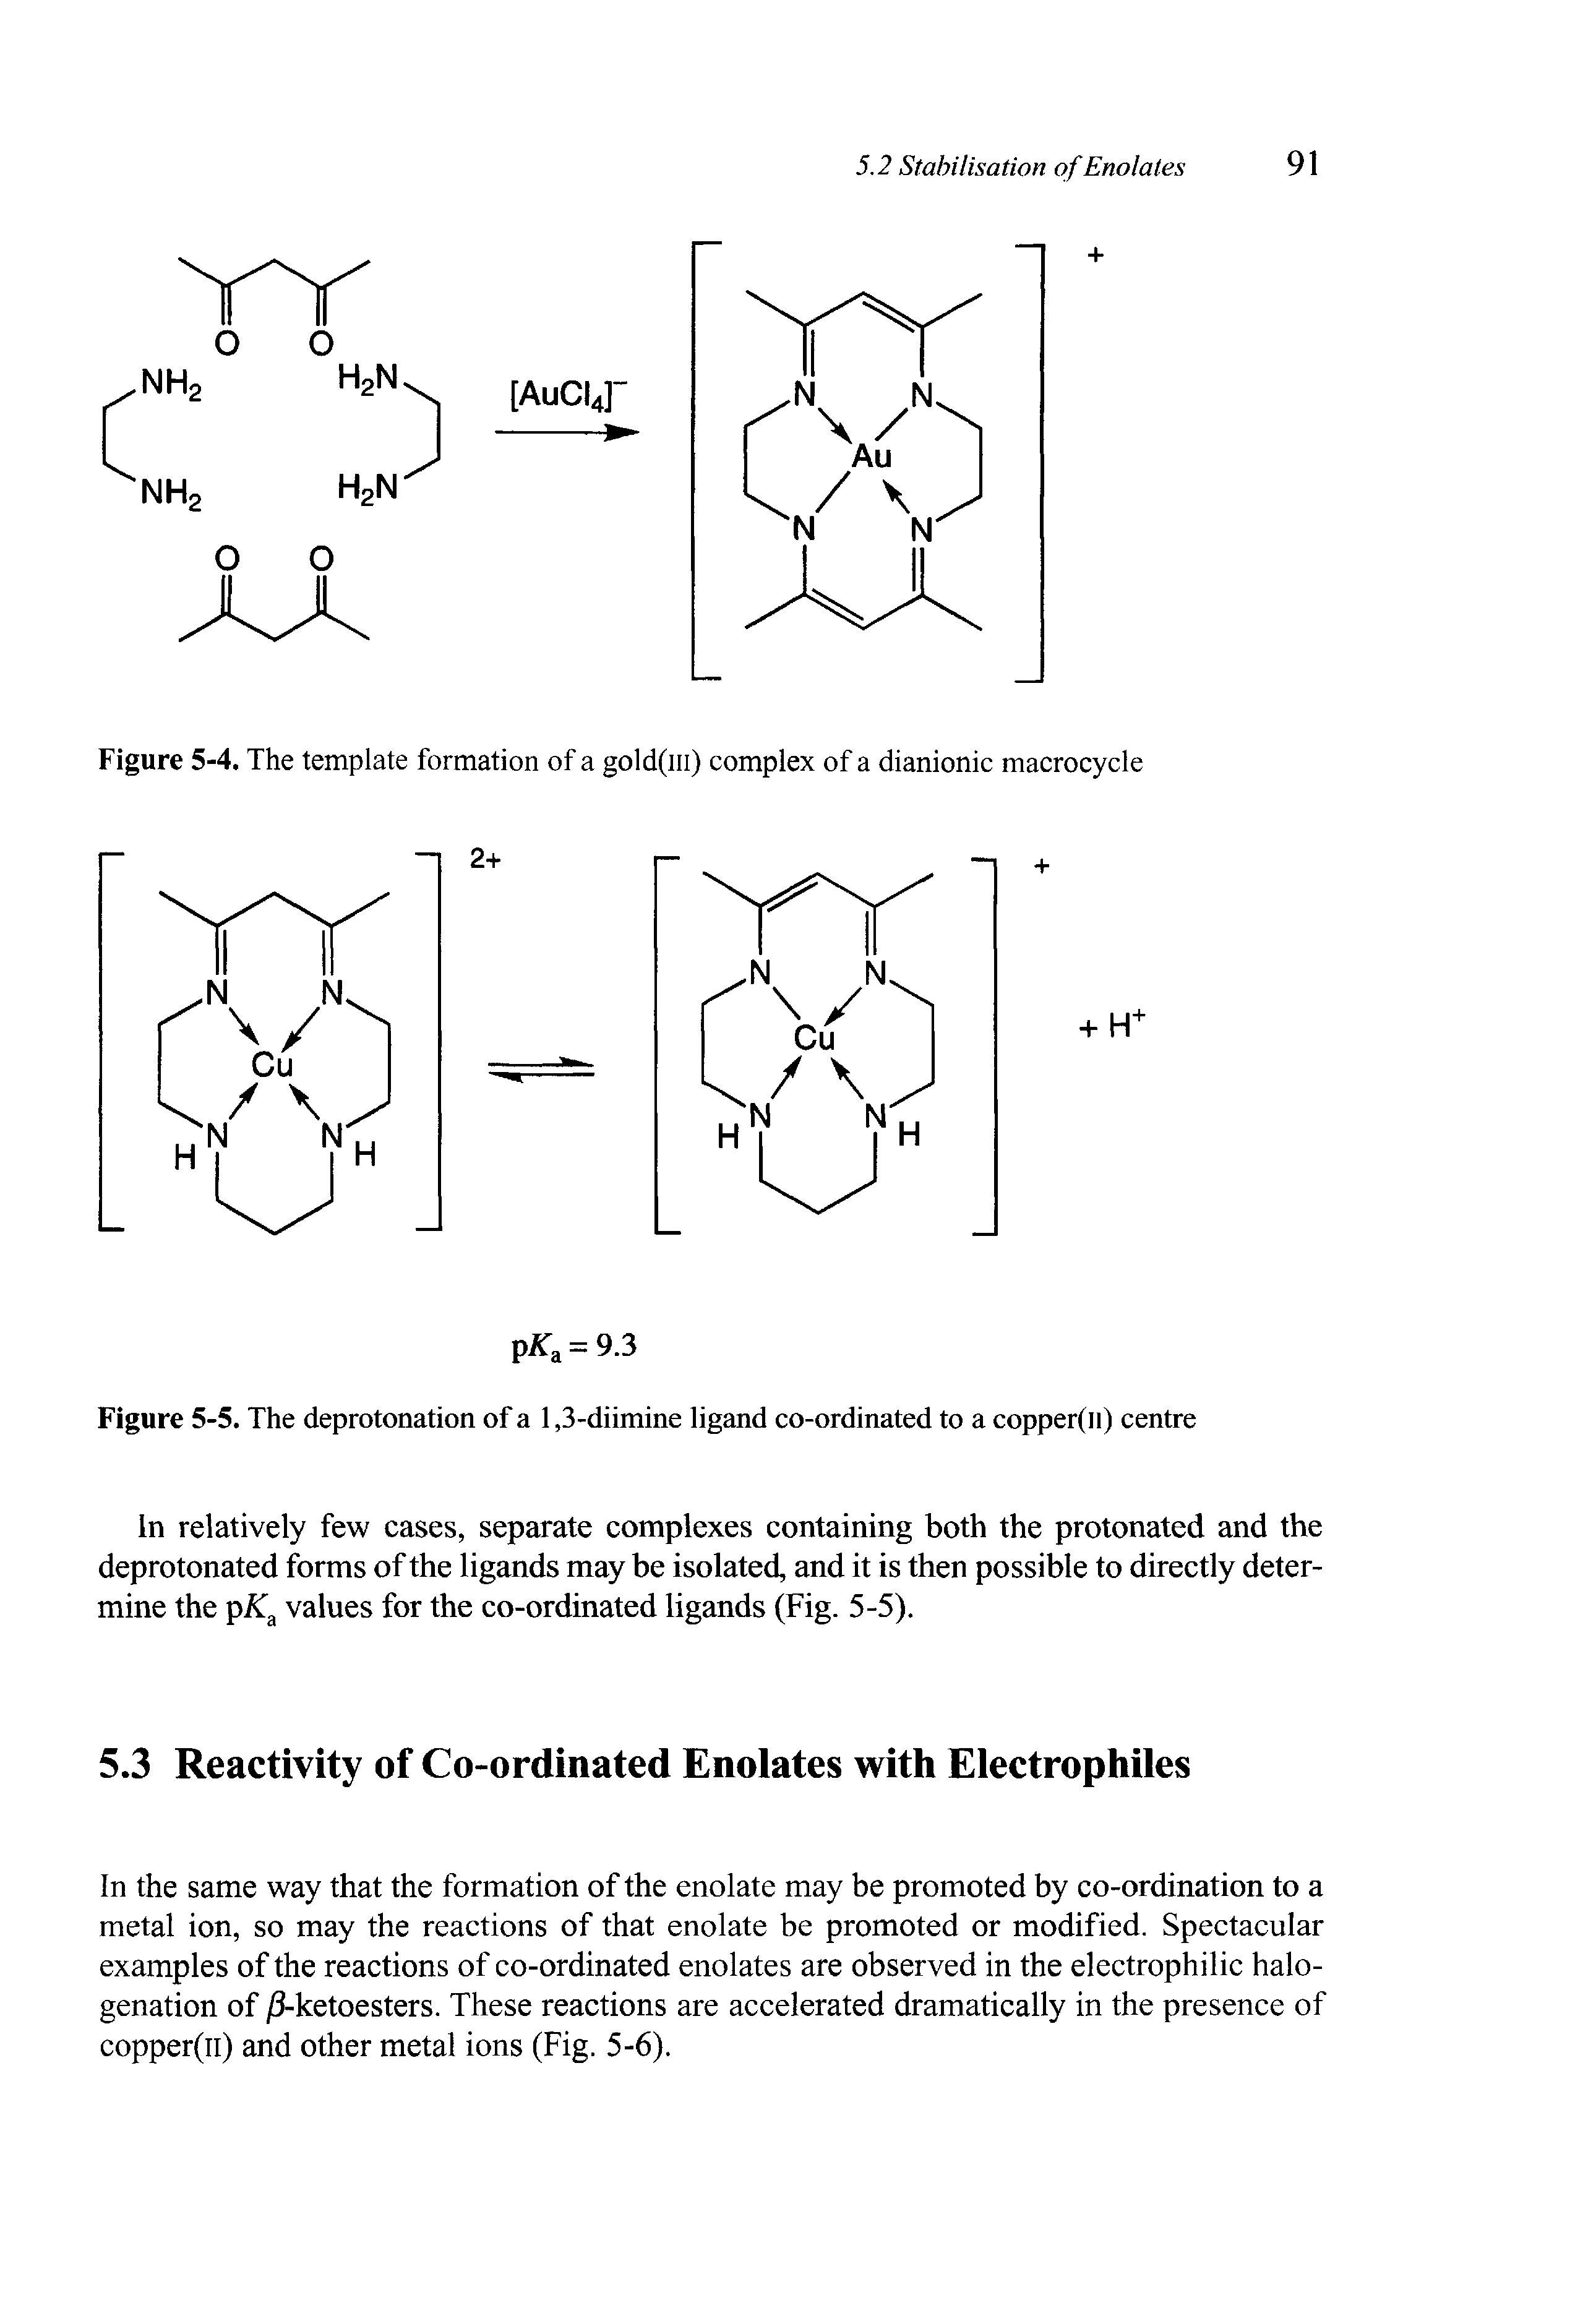 Figure 5-4. The template formation of a gold(m) complex of a dianionic macrocycle...